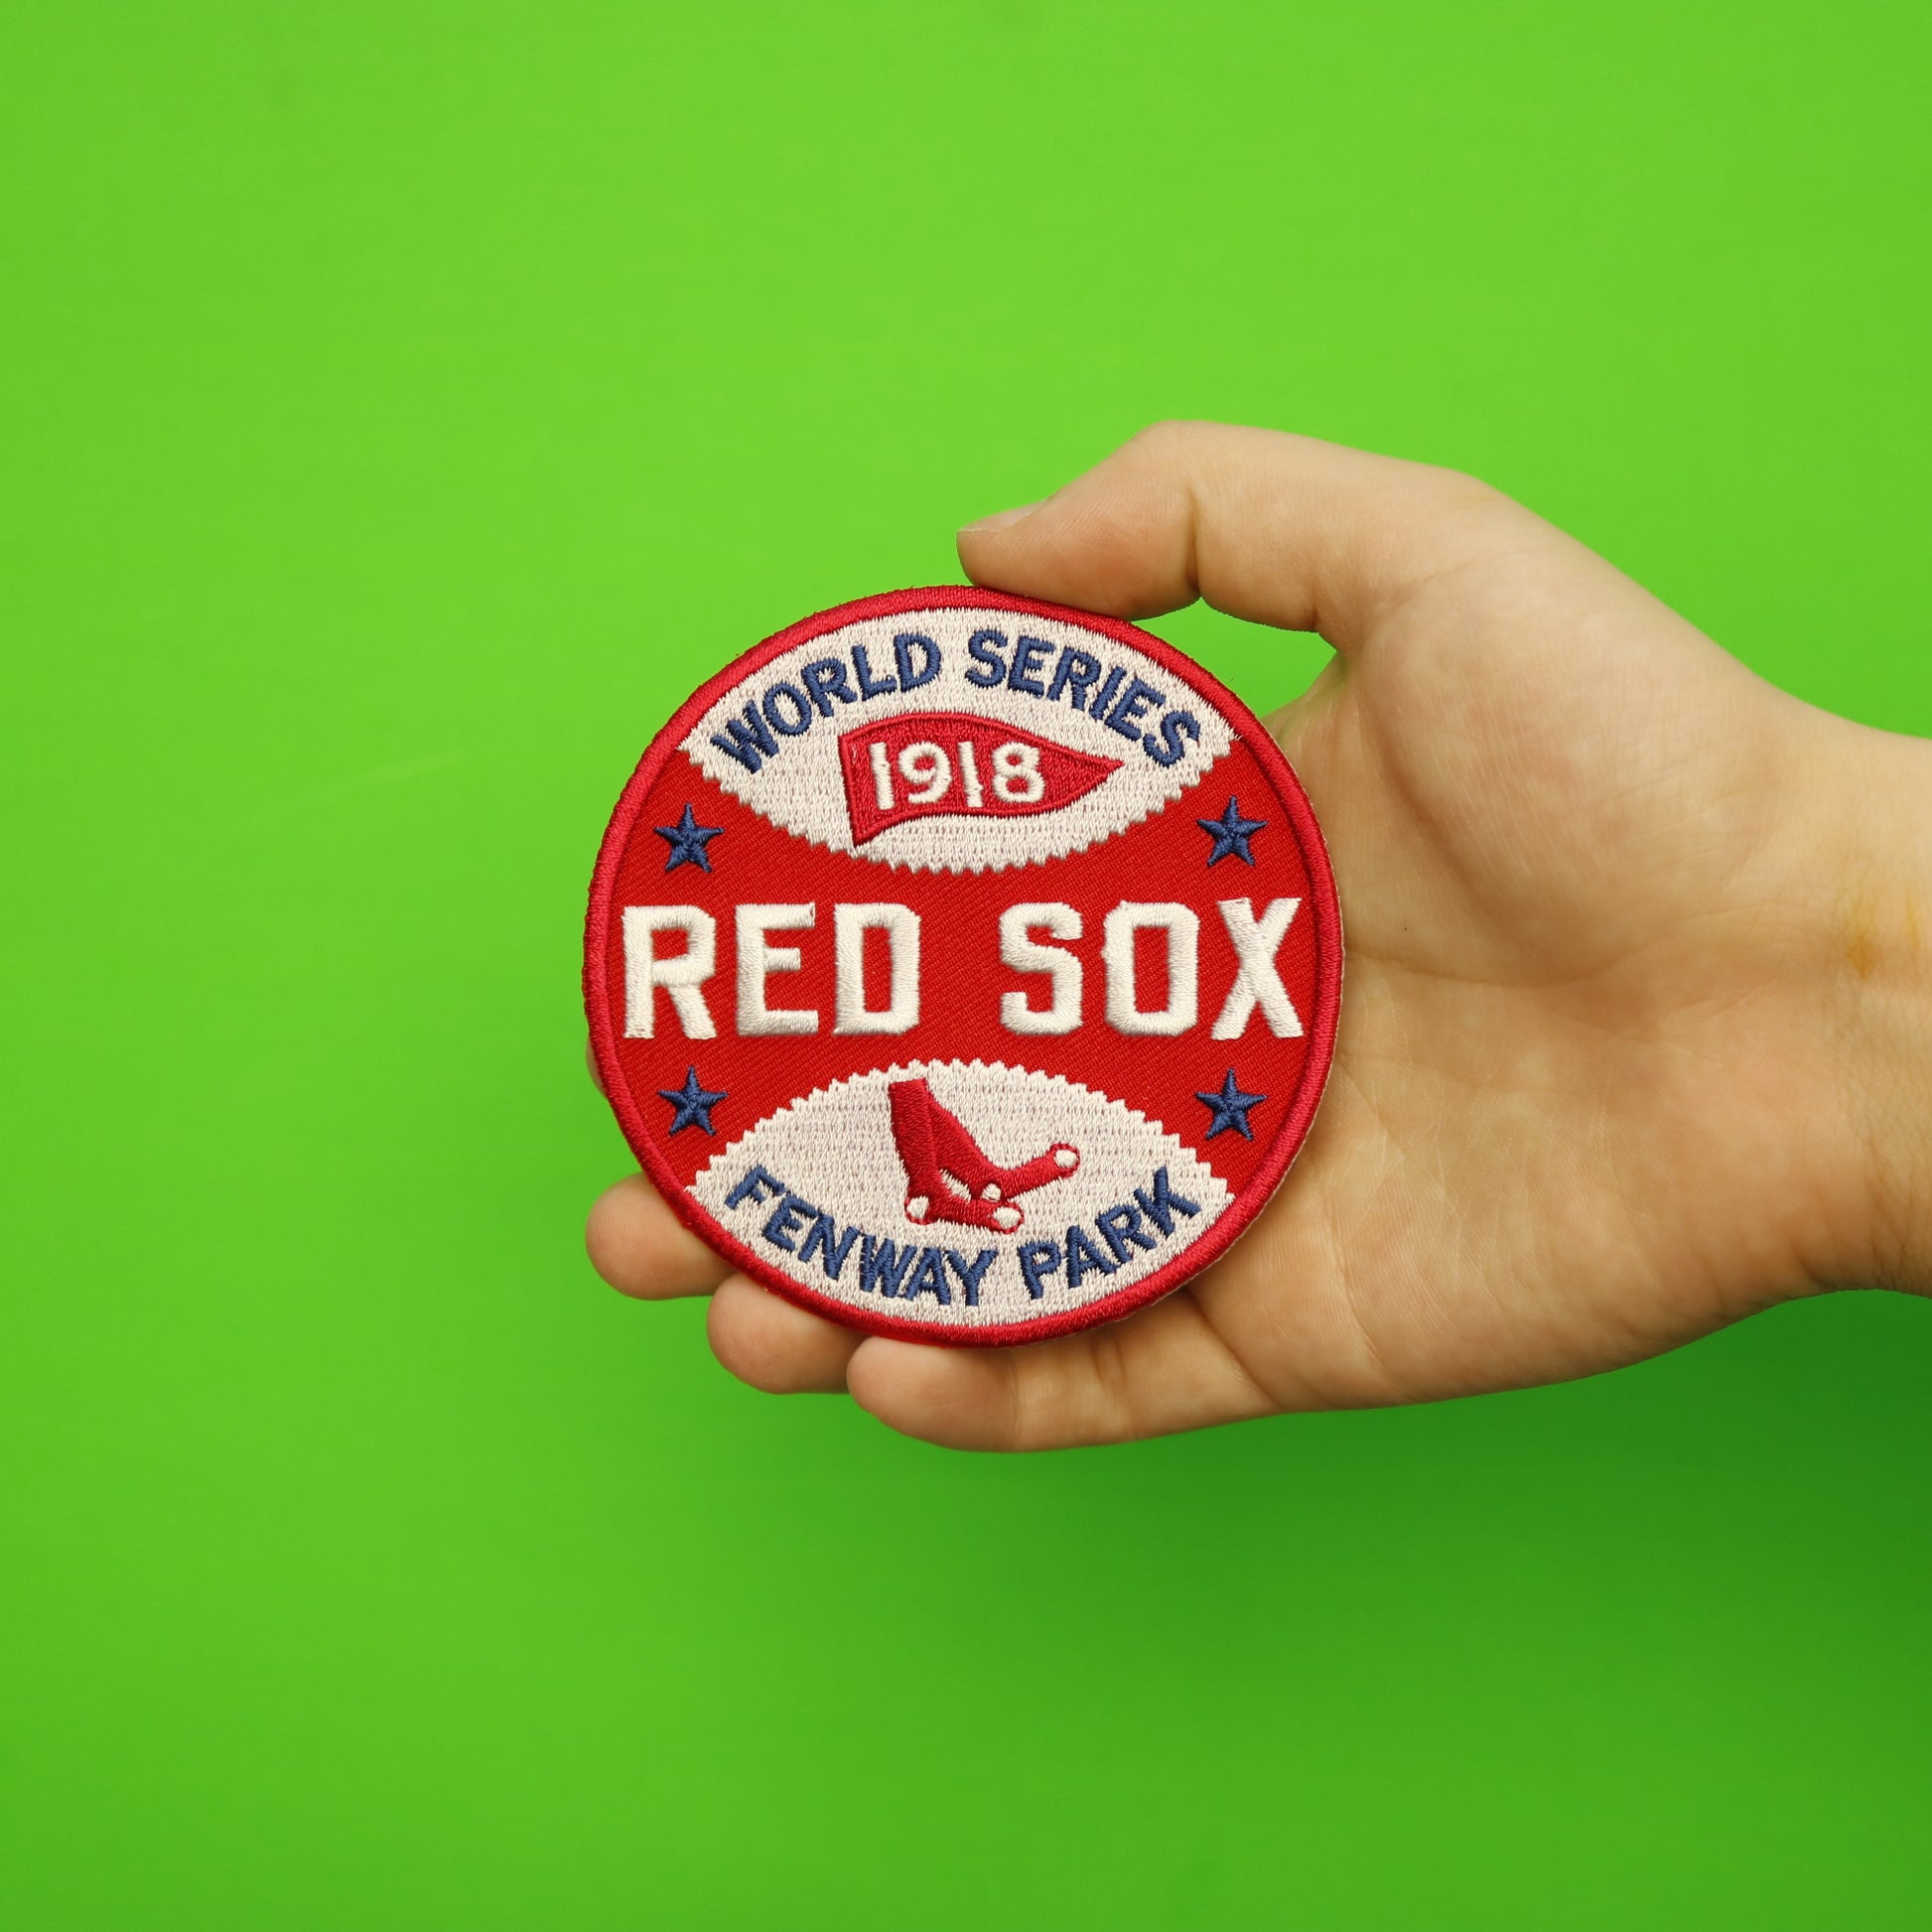 Boston Red Sox 1918 World Series Patch – The Emblem Source